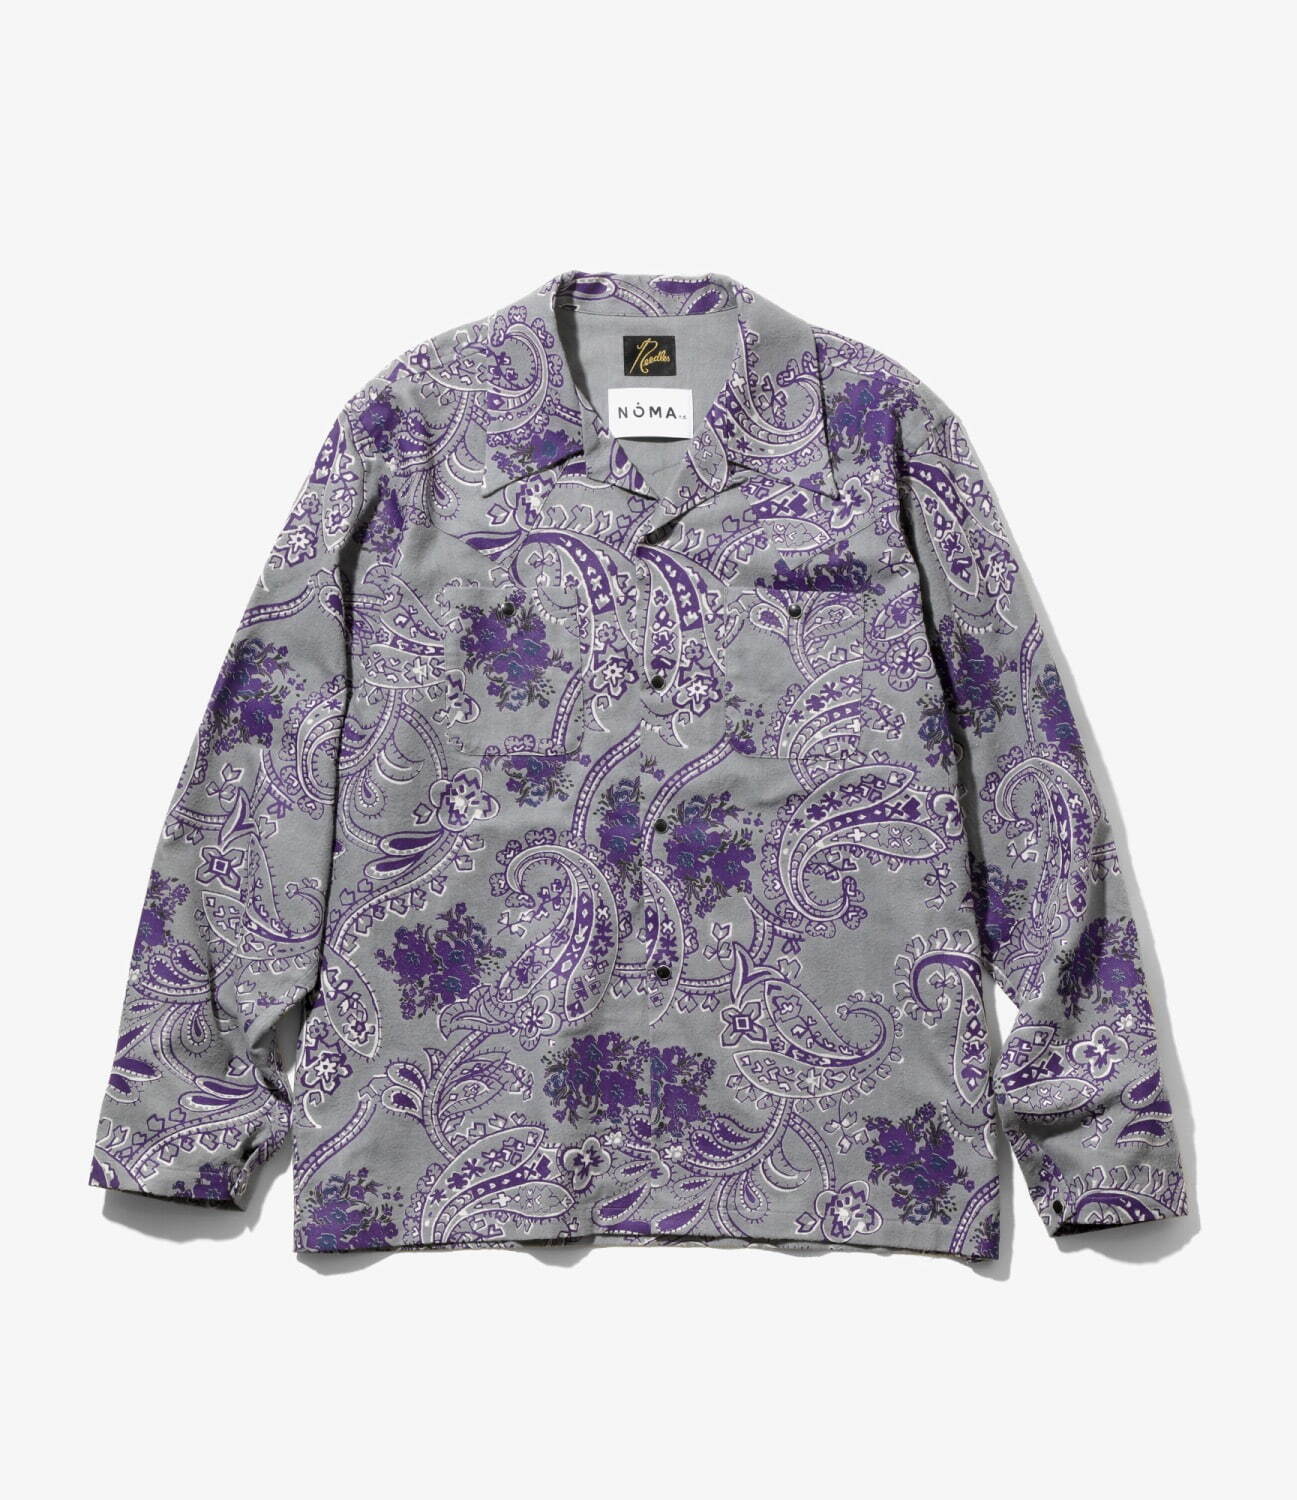 COWBOY ONE-UP SHIRT - FLANNEL / PAISLEY PT. 36,300円